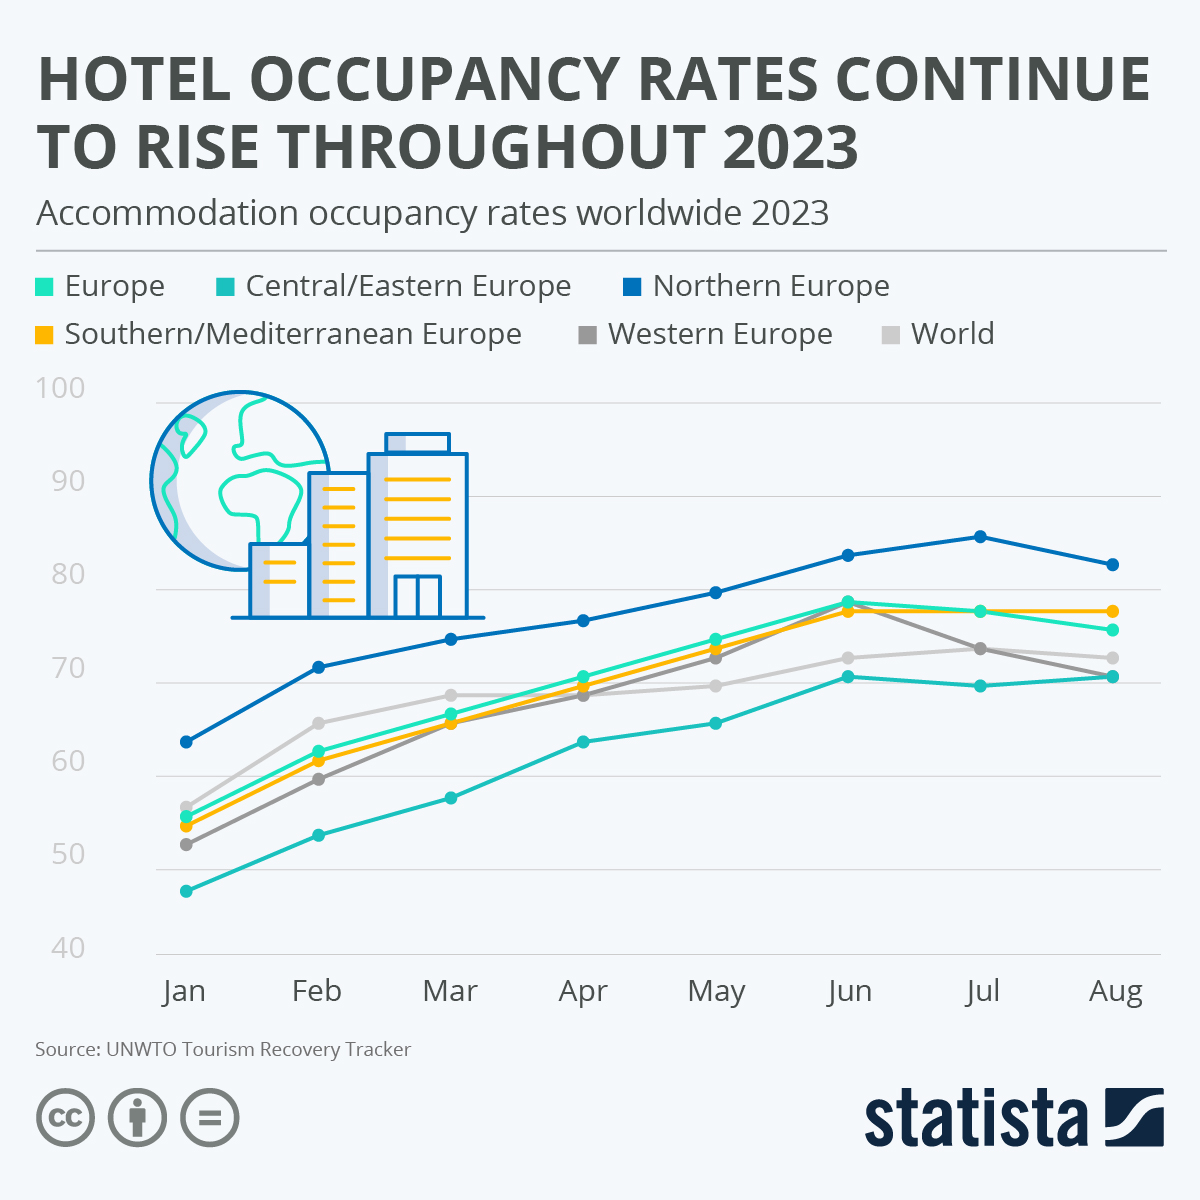 Hotel Occupancy Rates Continue To Rise Throughout 2023 #Hotel #Travel #Trip #Accommodaiton #statista